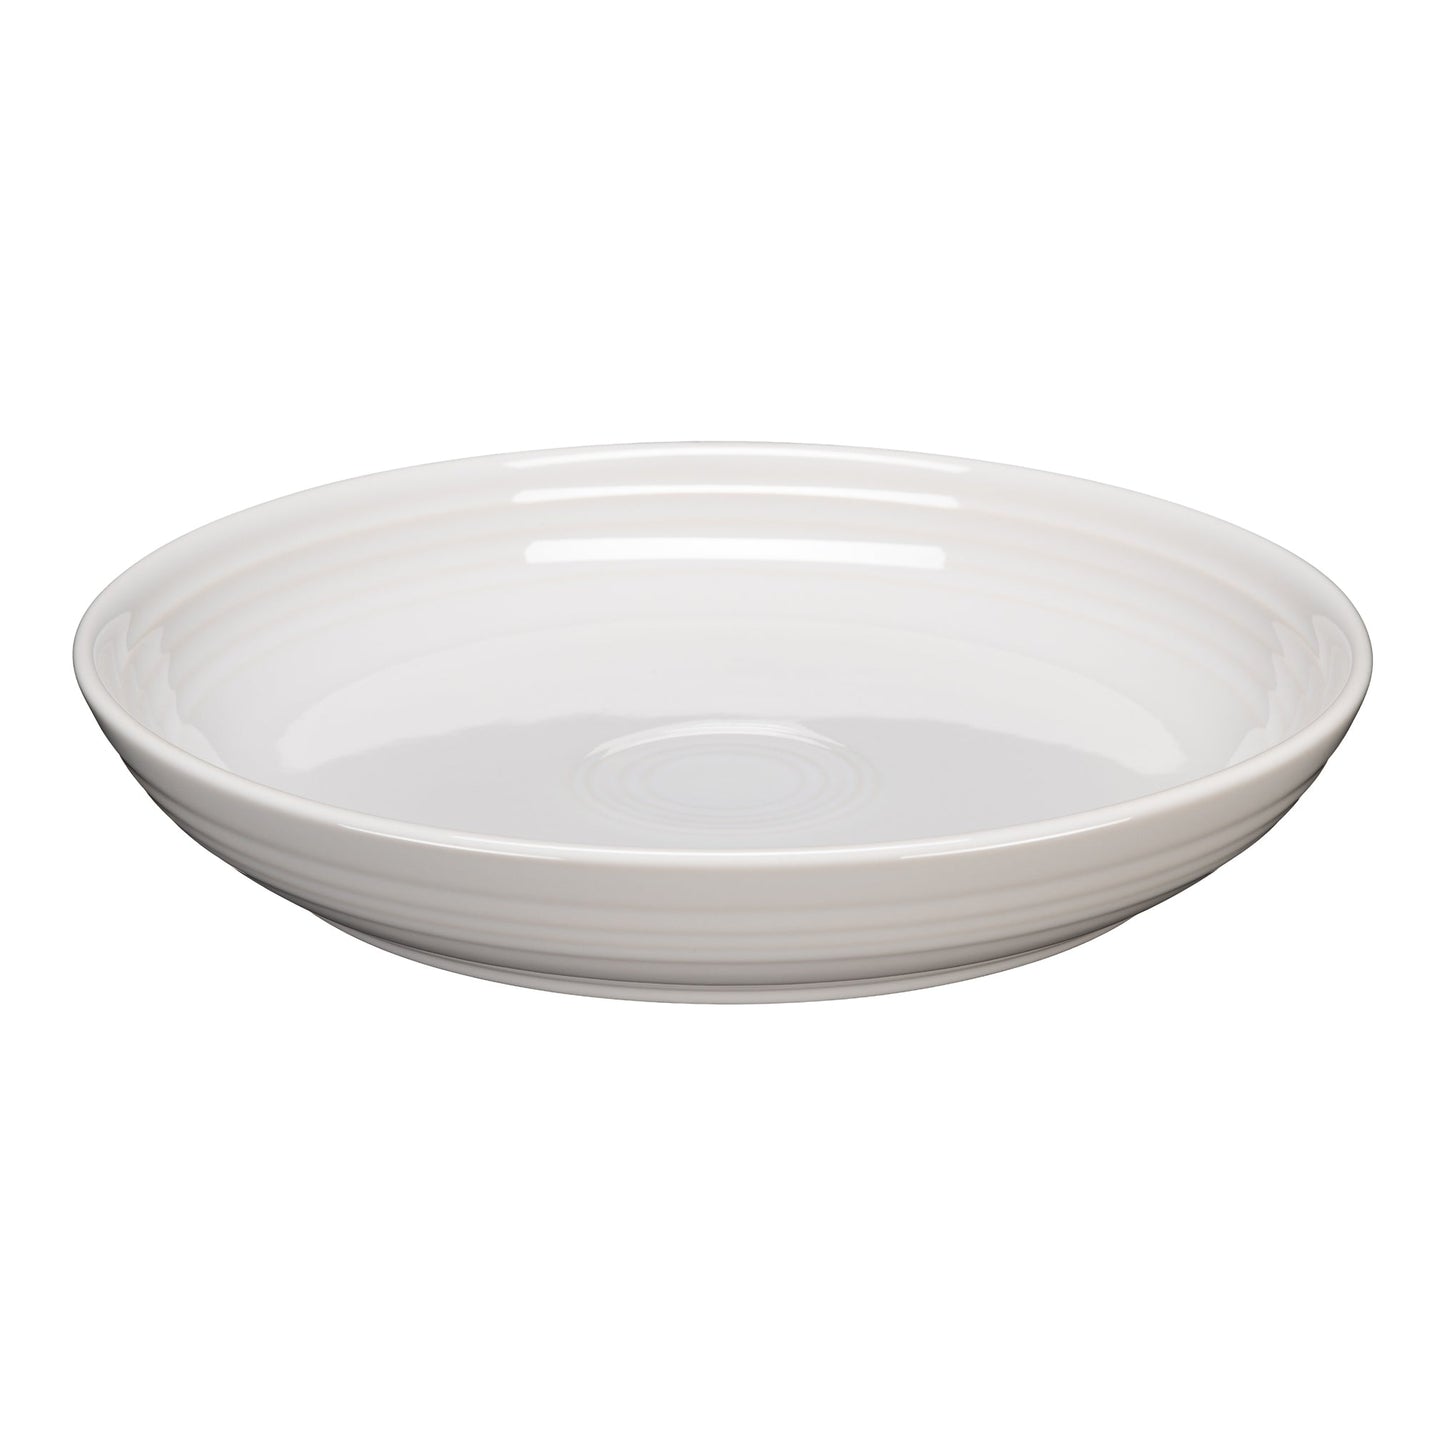 8 1/2" Luncheon Bowl Plate